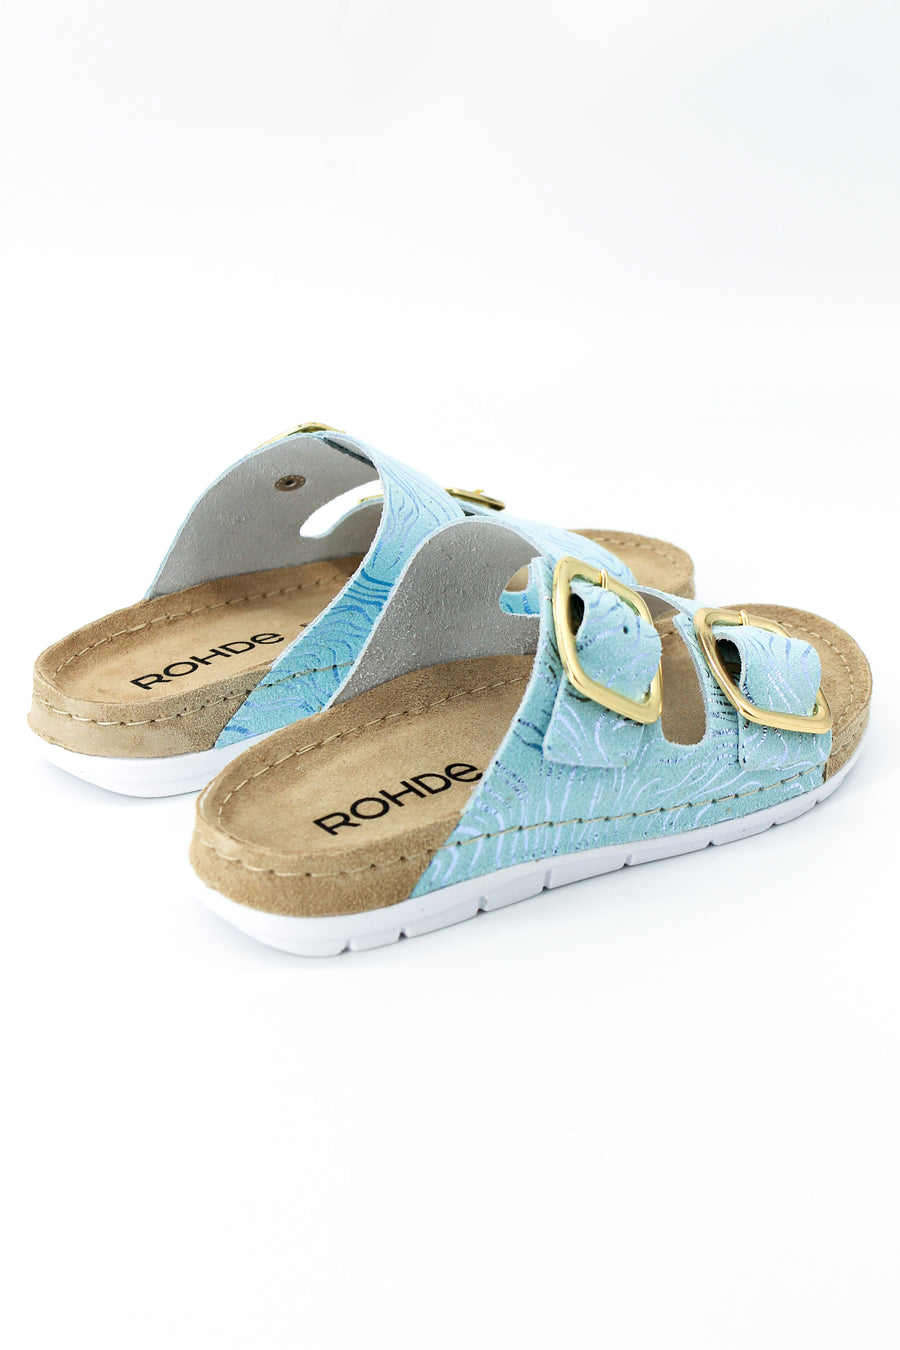 Rohde 5878 Turquoise